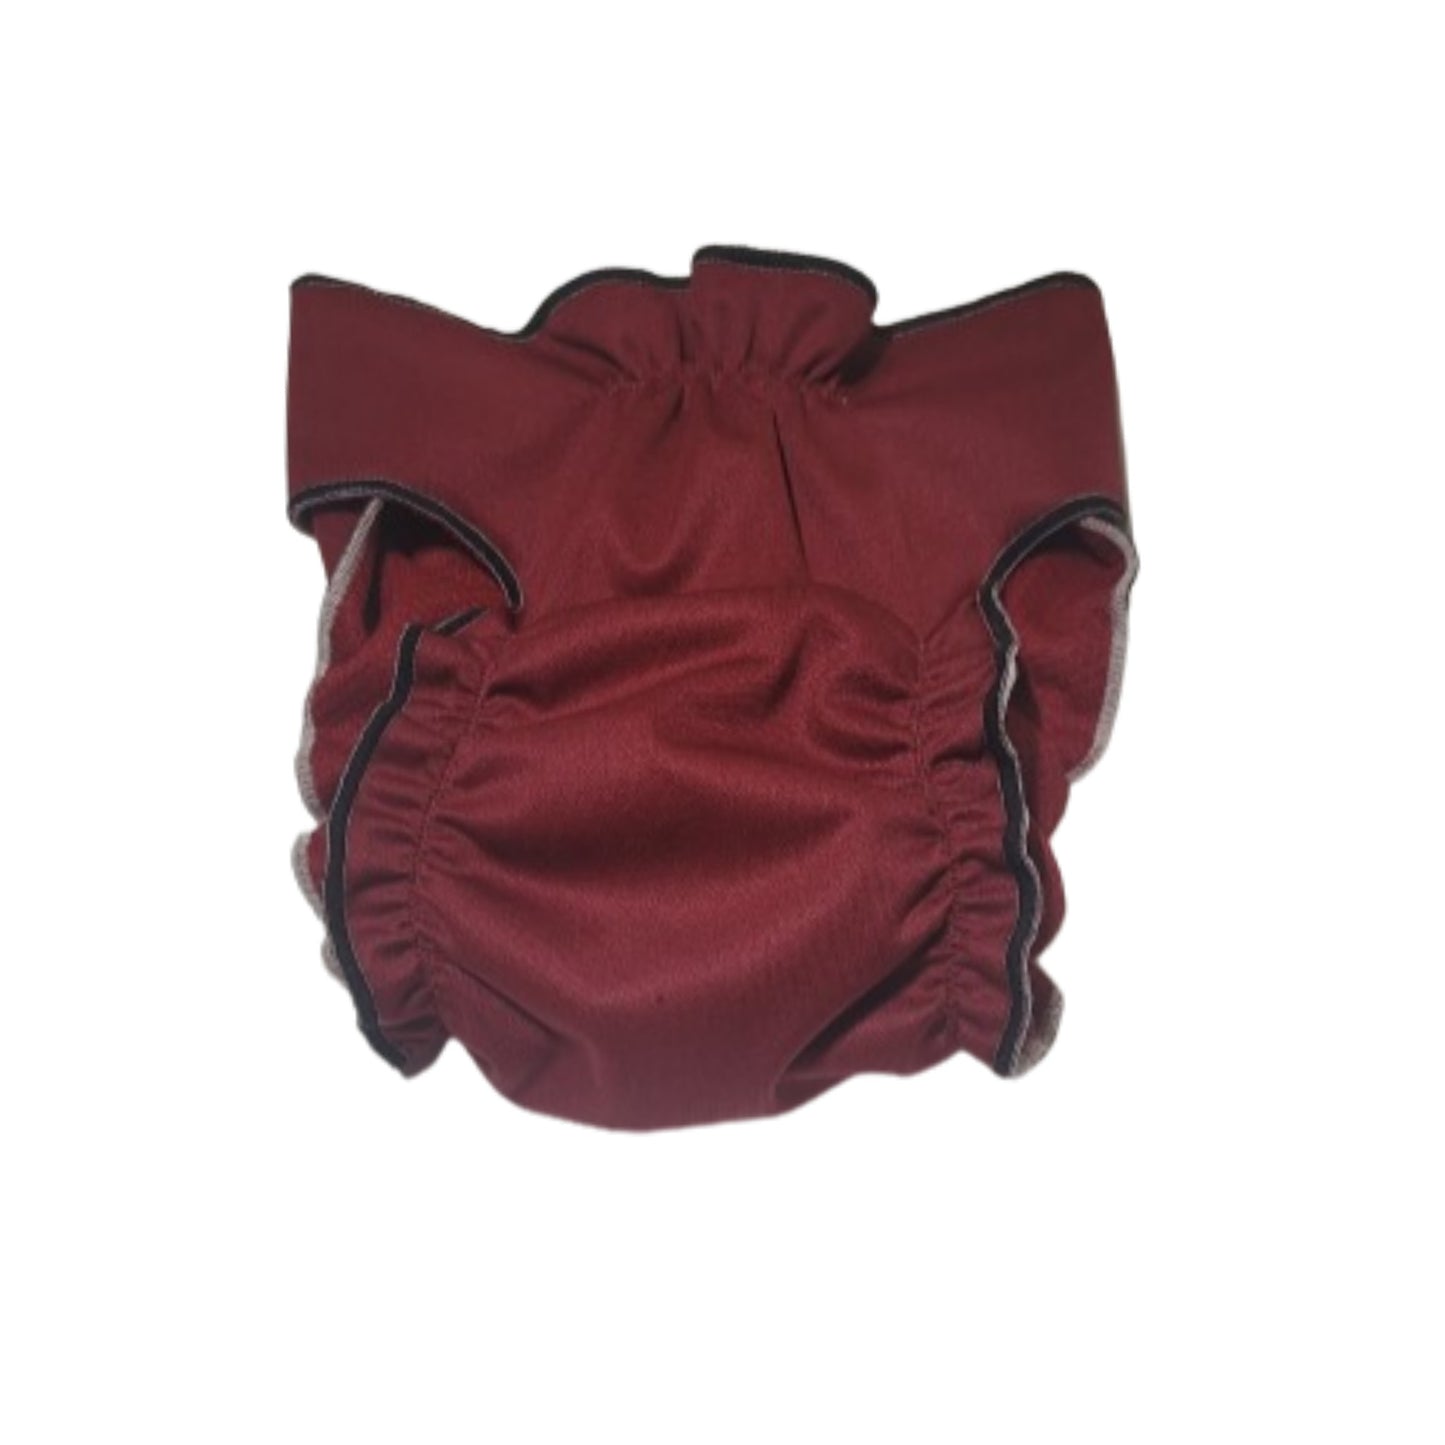 Female Dog Diaper  Britches -With Tail Opening- Burgundy